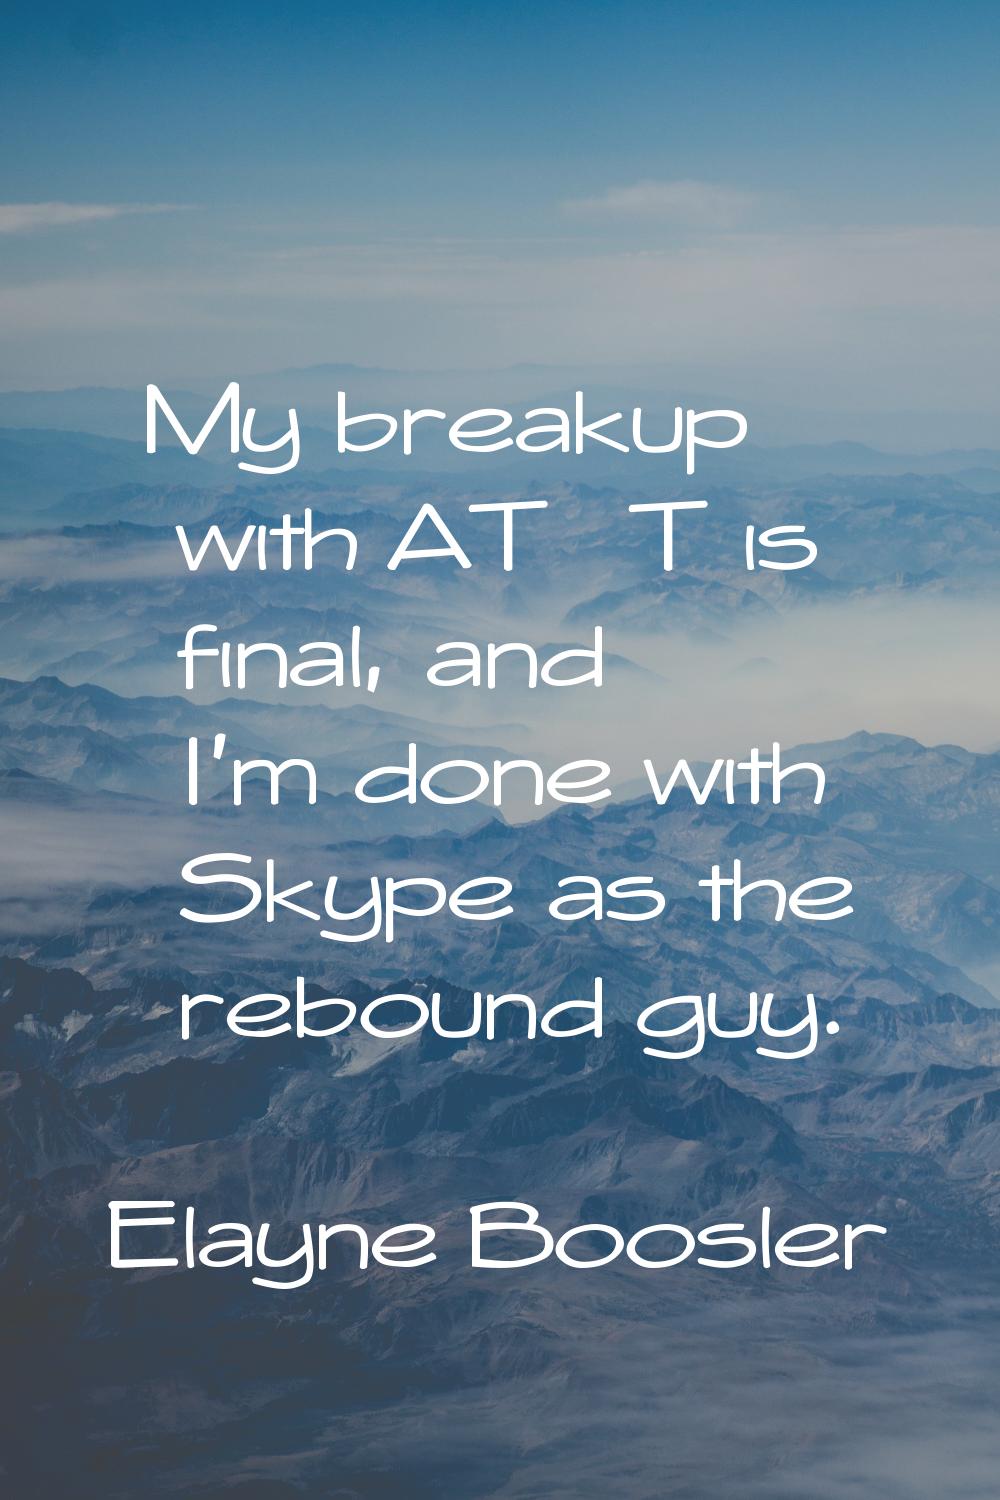 My breakup with AT&T is final, and I'm done with Skype as the rebound guy.